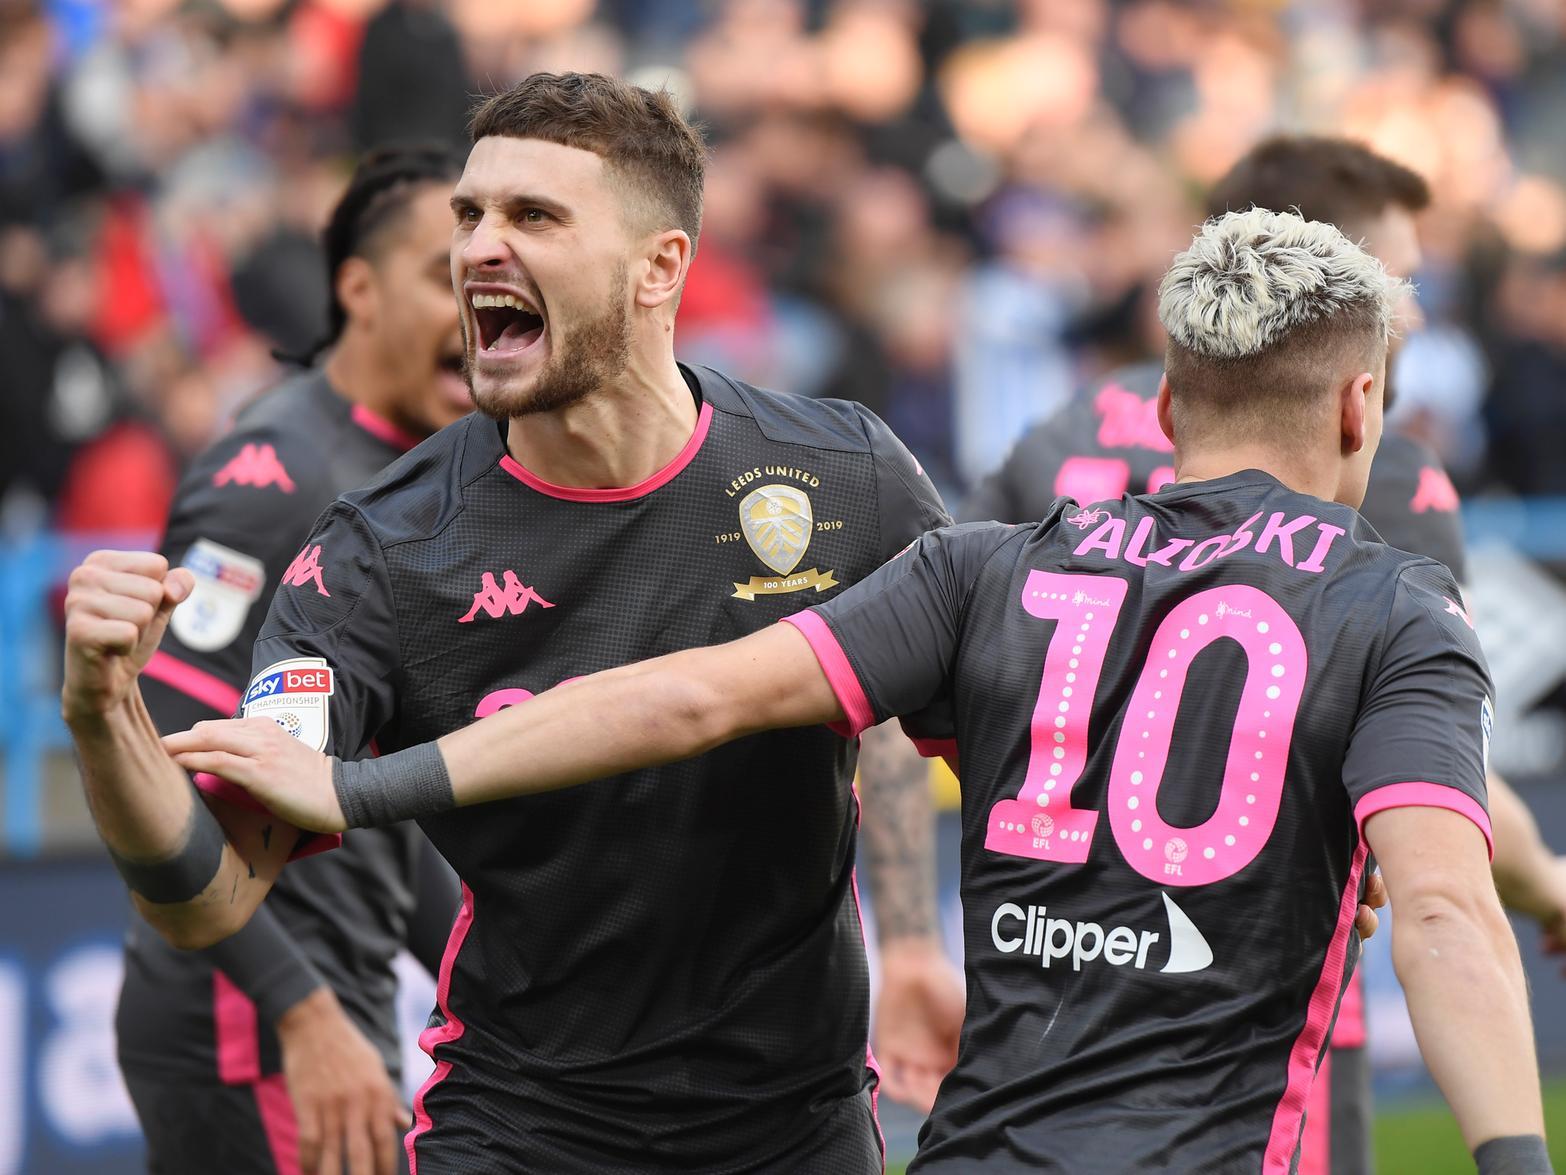 Leeds United ace Matheus Klich took to social media after his side's 3-2 win over Millwall - a game fraught with contentions decisions - and posted the straight to the point message of: "Justice"